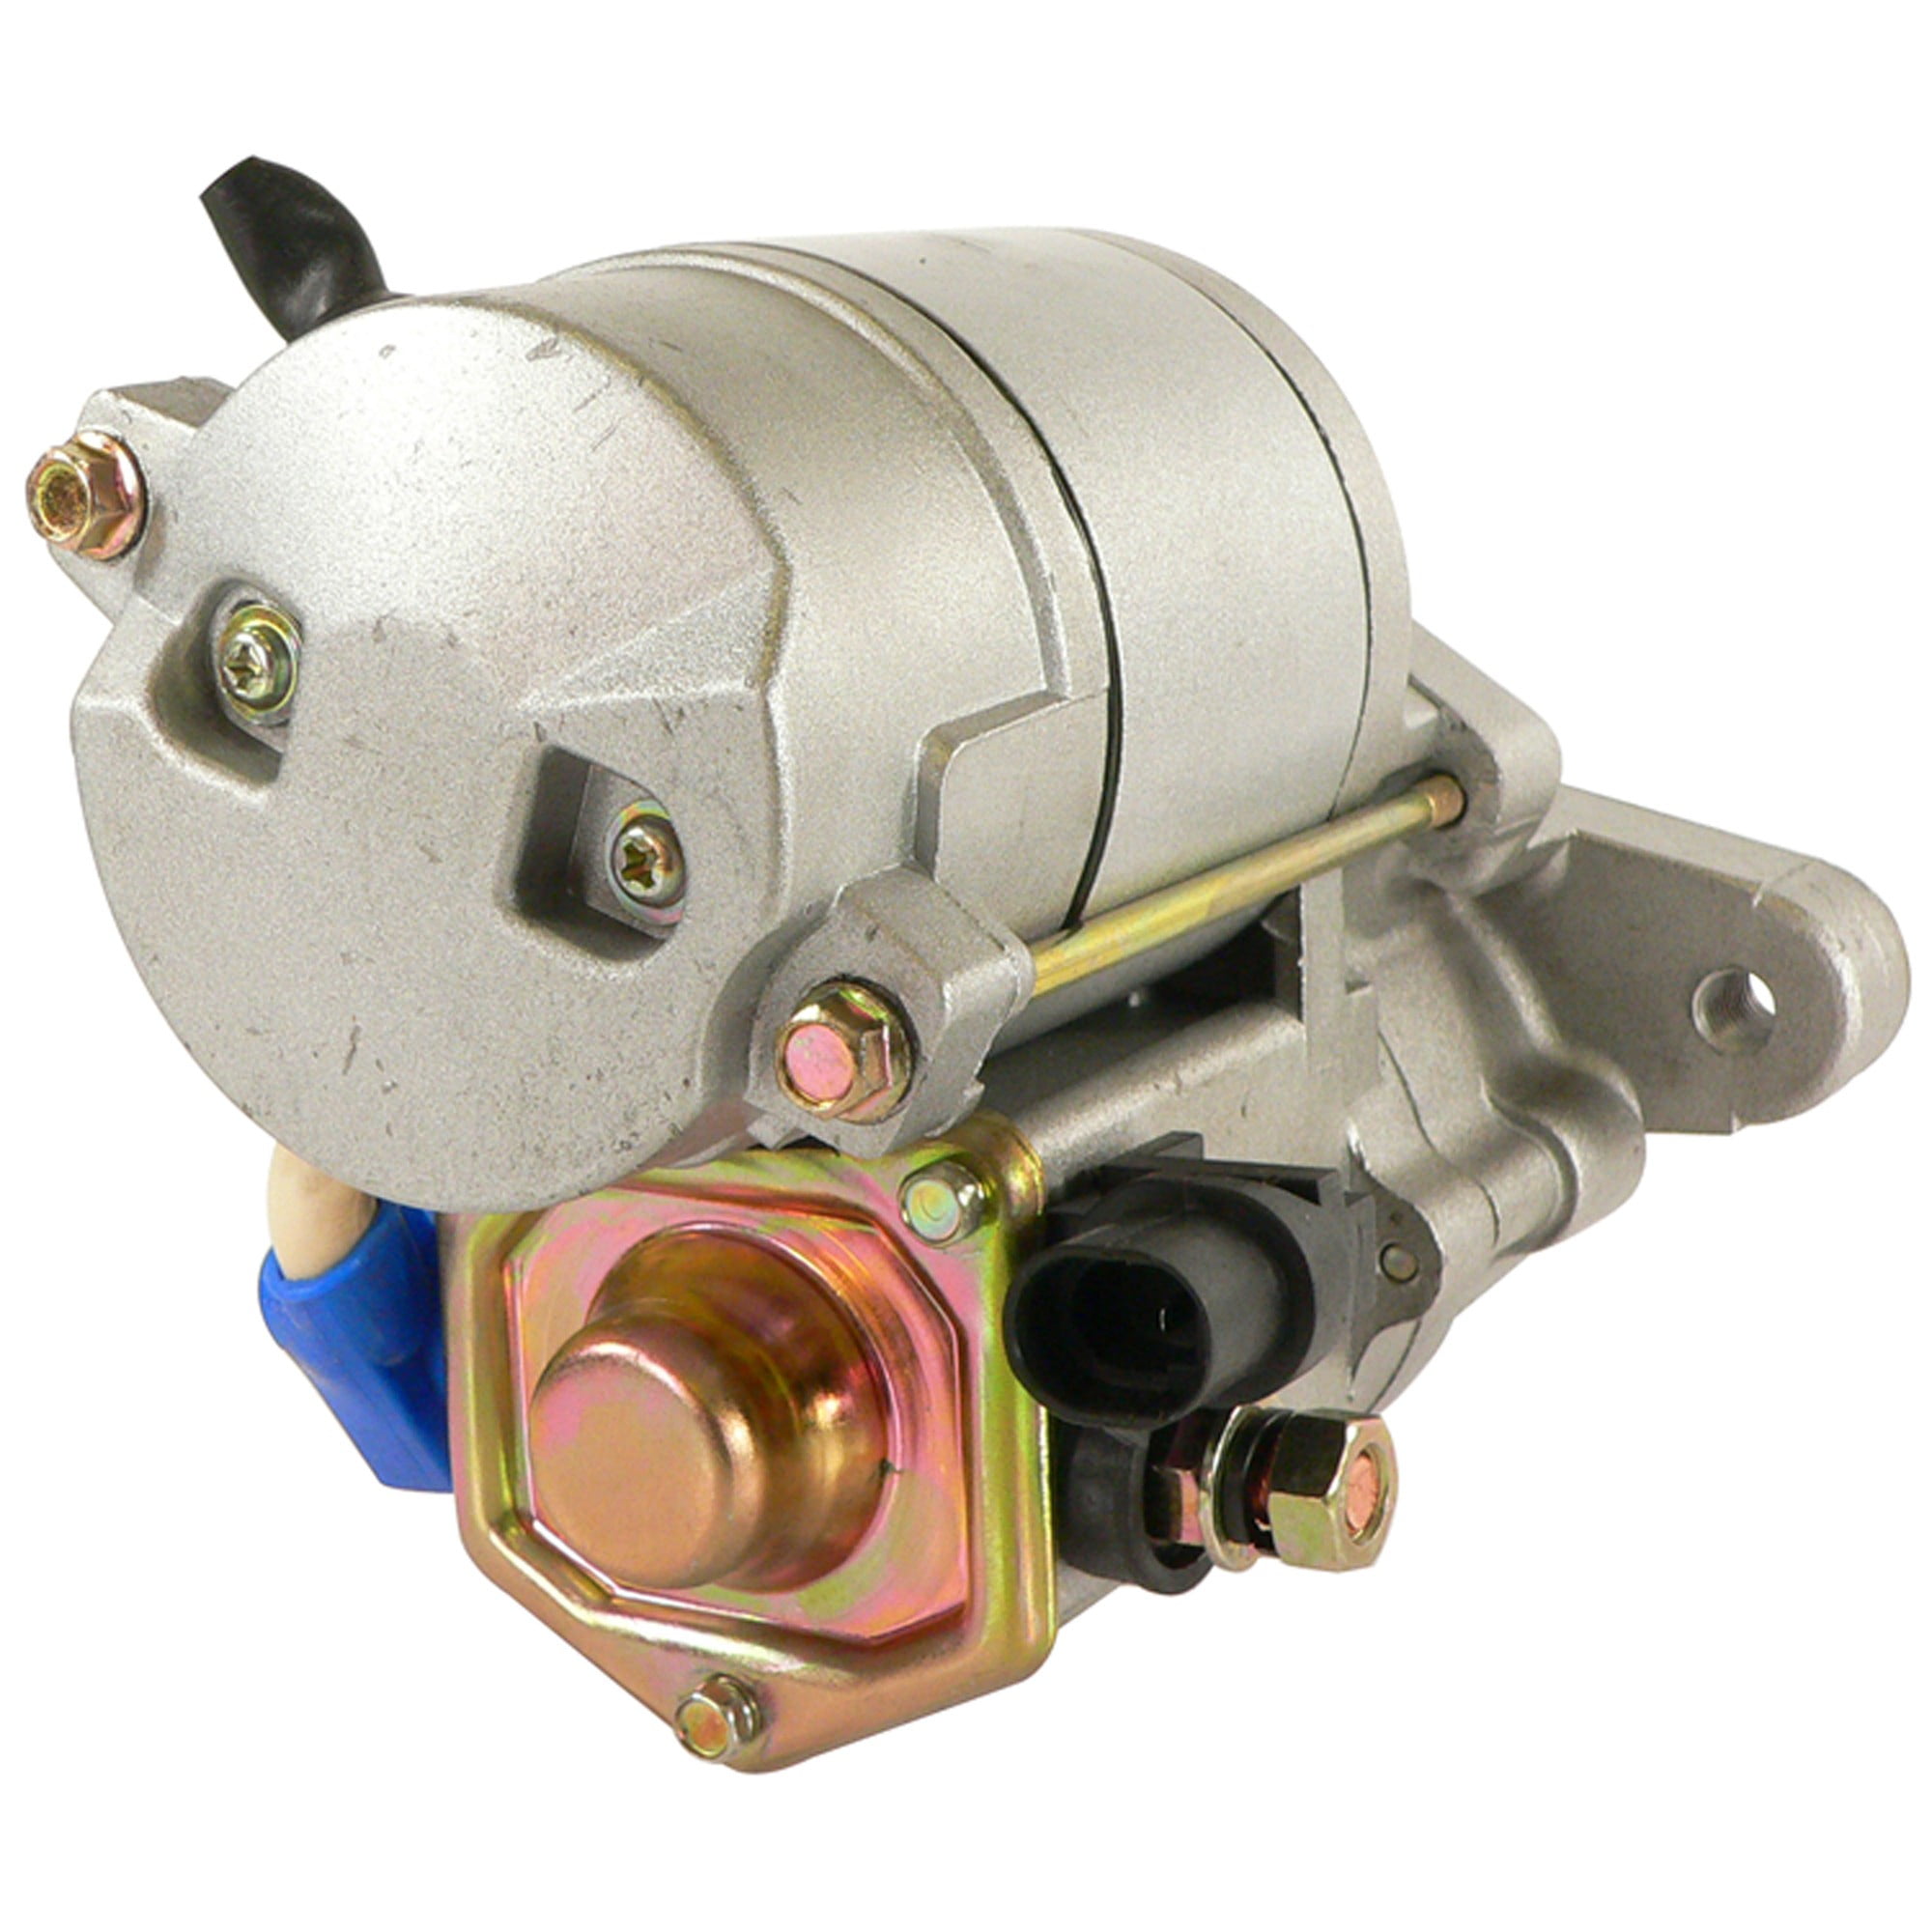 DB Electrical SND0535 New Starter For Dodge Durango 4.7 4.7L 5.7 5.7L 2004-2005 56029750AA 428000-2050 